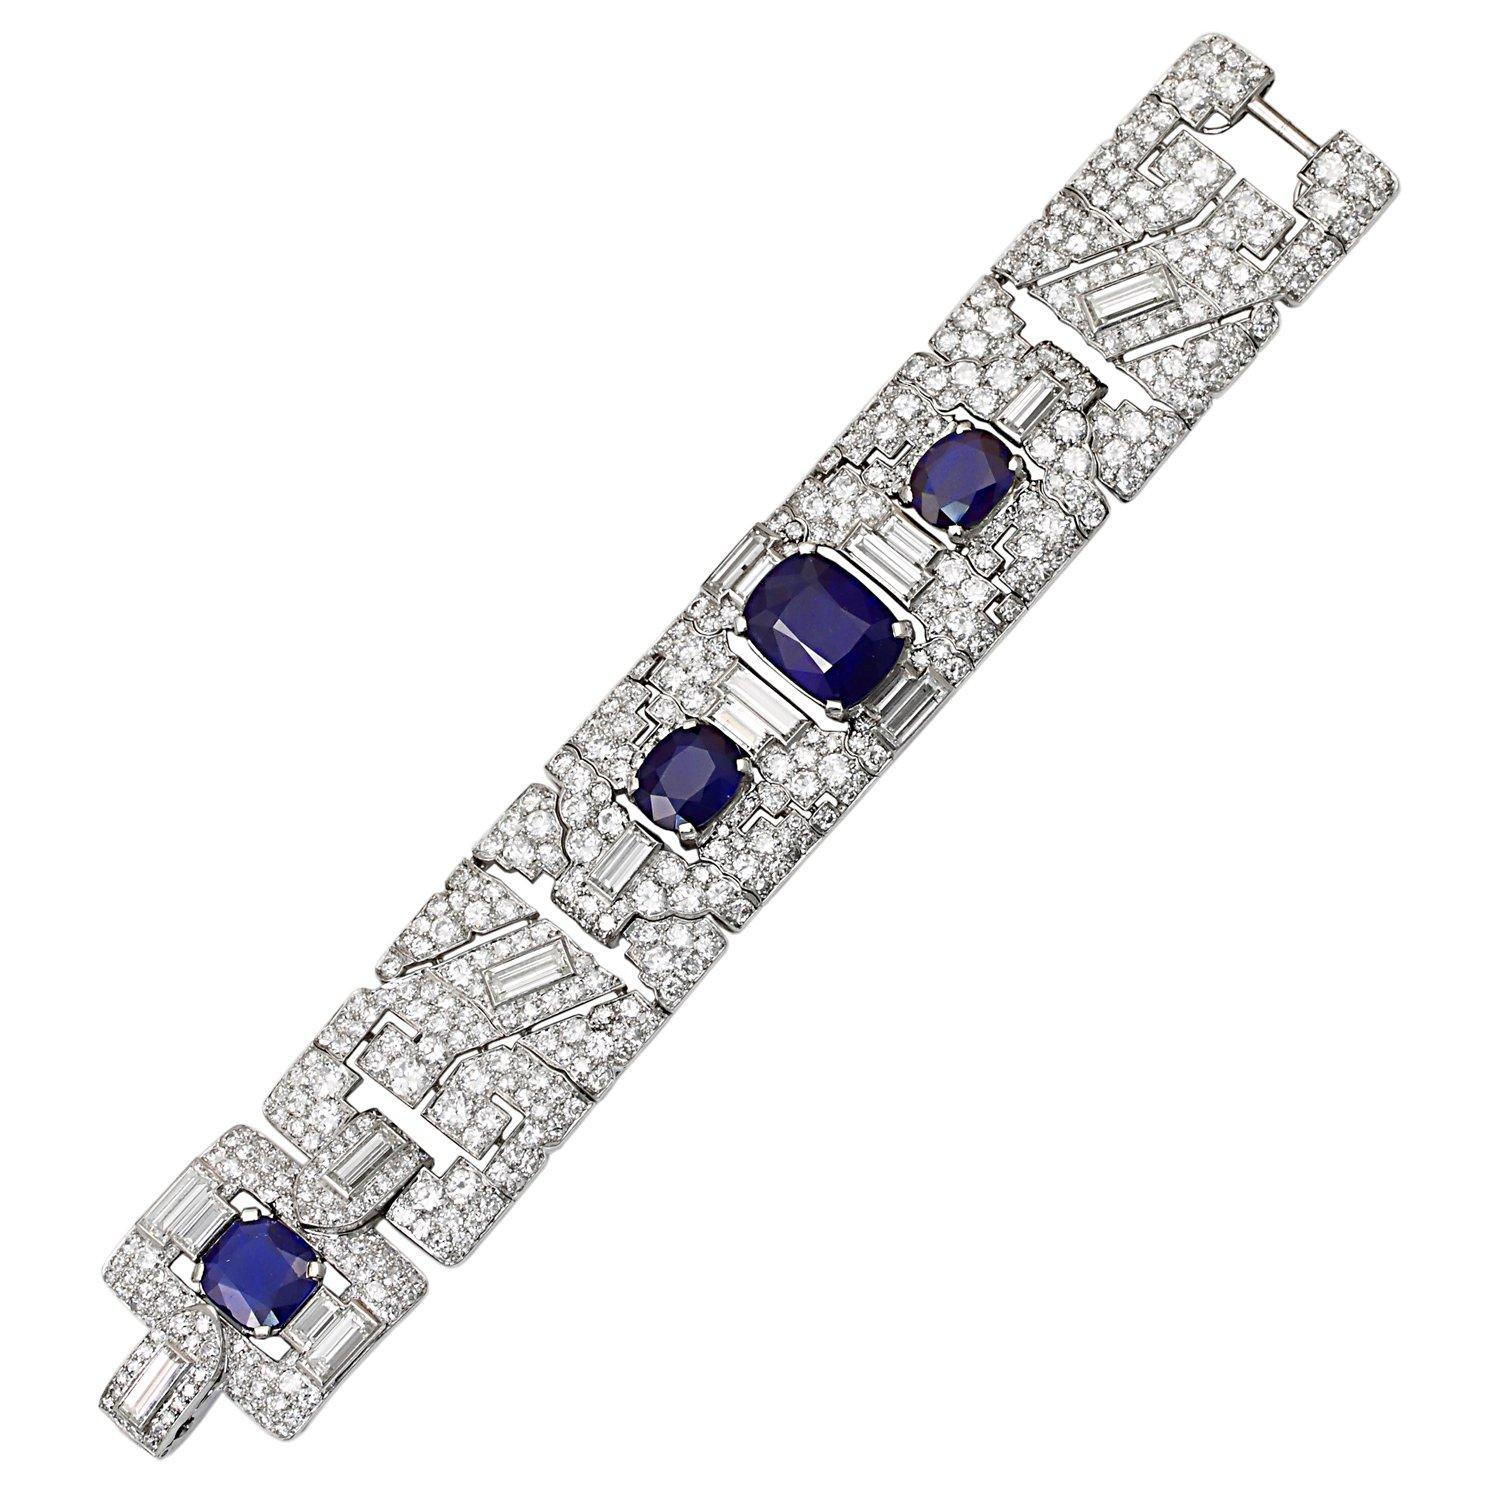 A magnificent and extremely rare art deco bracelet by Cartier, designed with a broad geometric design centering upon a large natural, no heat cushion shape sapphire accented by baguettes and old-mine diamonds extending towards two small oval shape